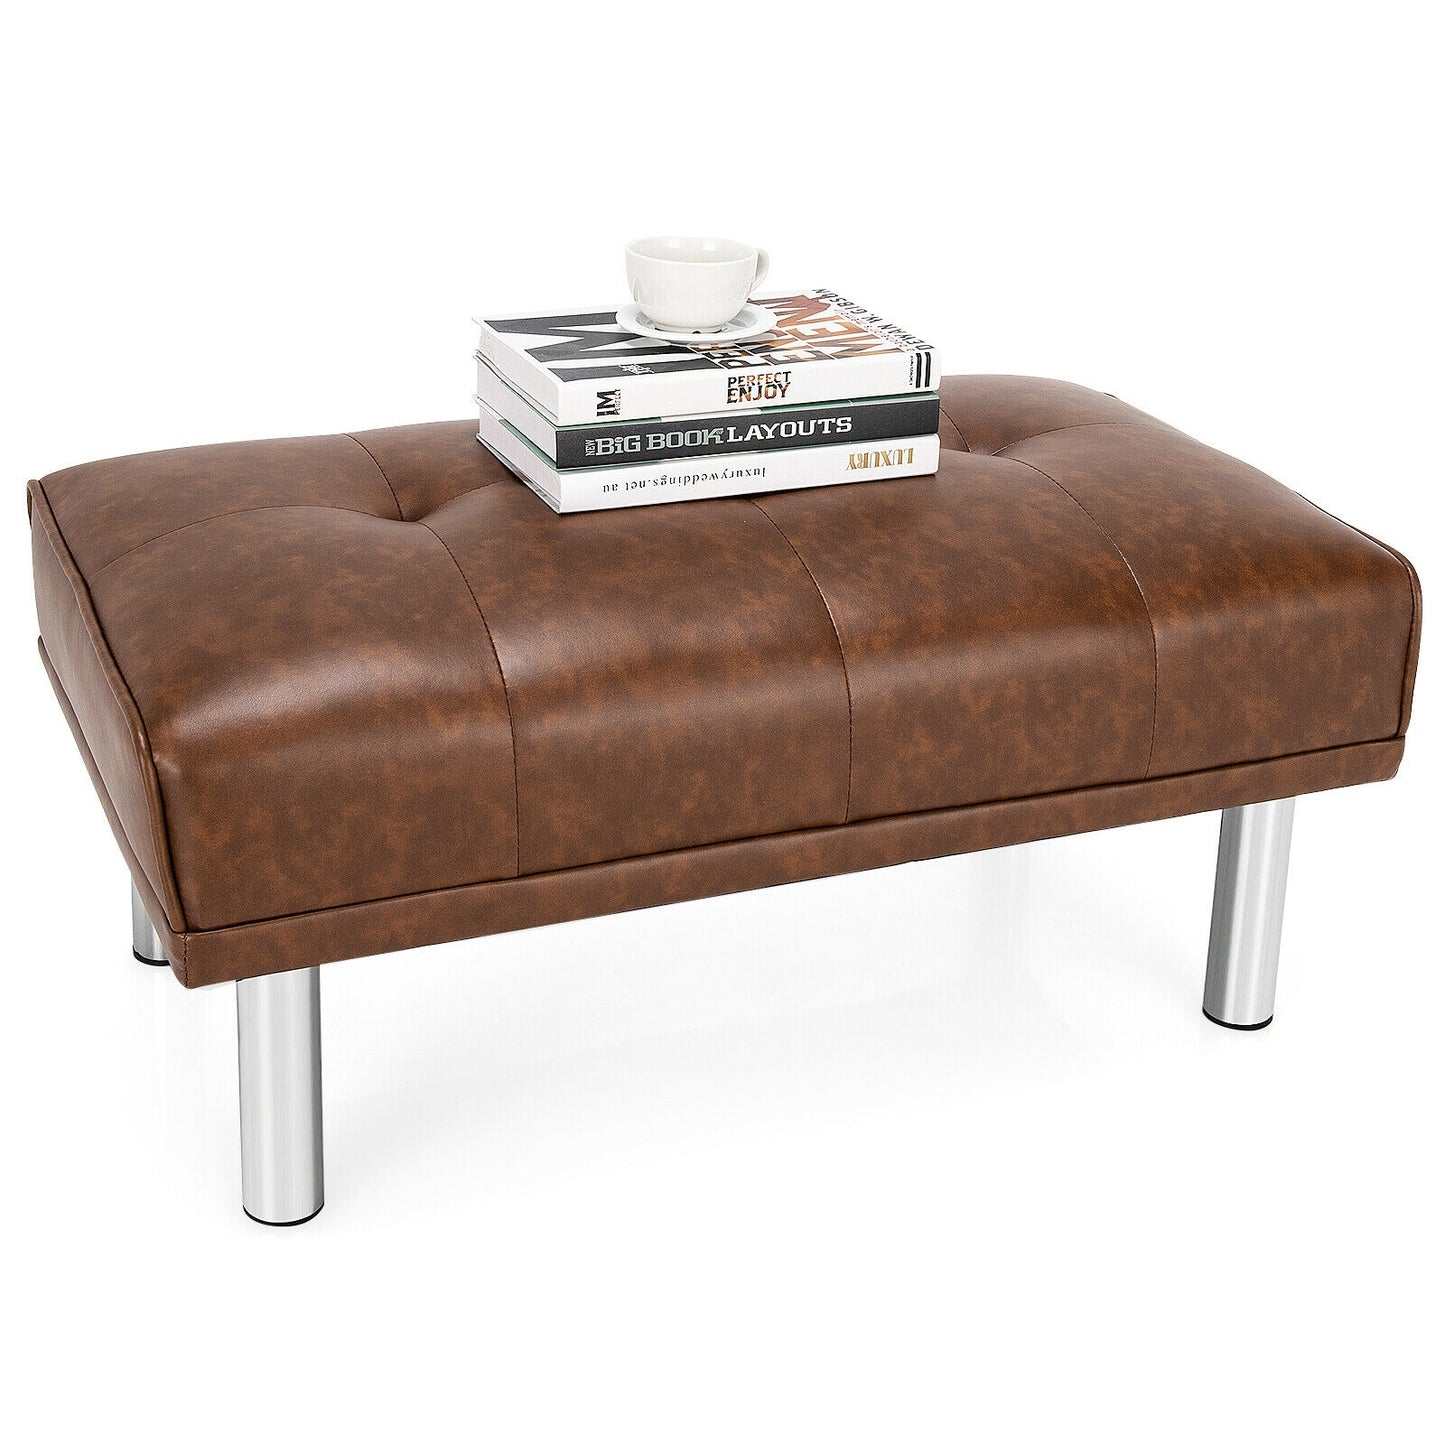 Rectangle Tufted Ottoman with Stainless Steel Legs for Living Room-Brown